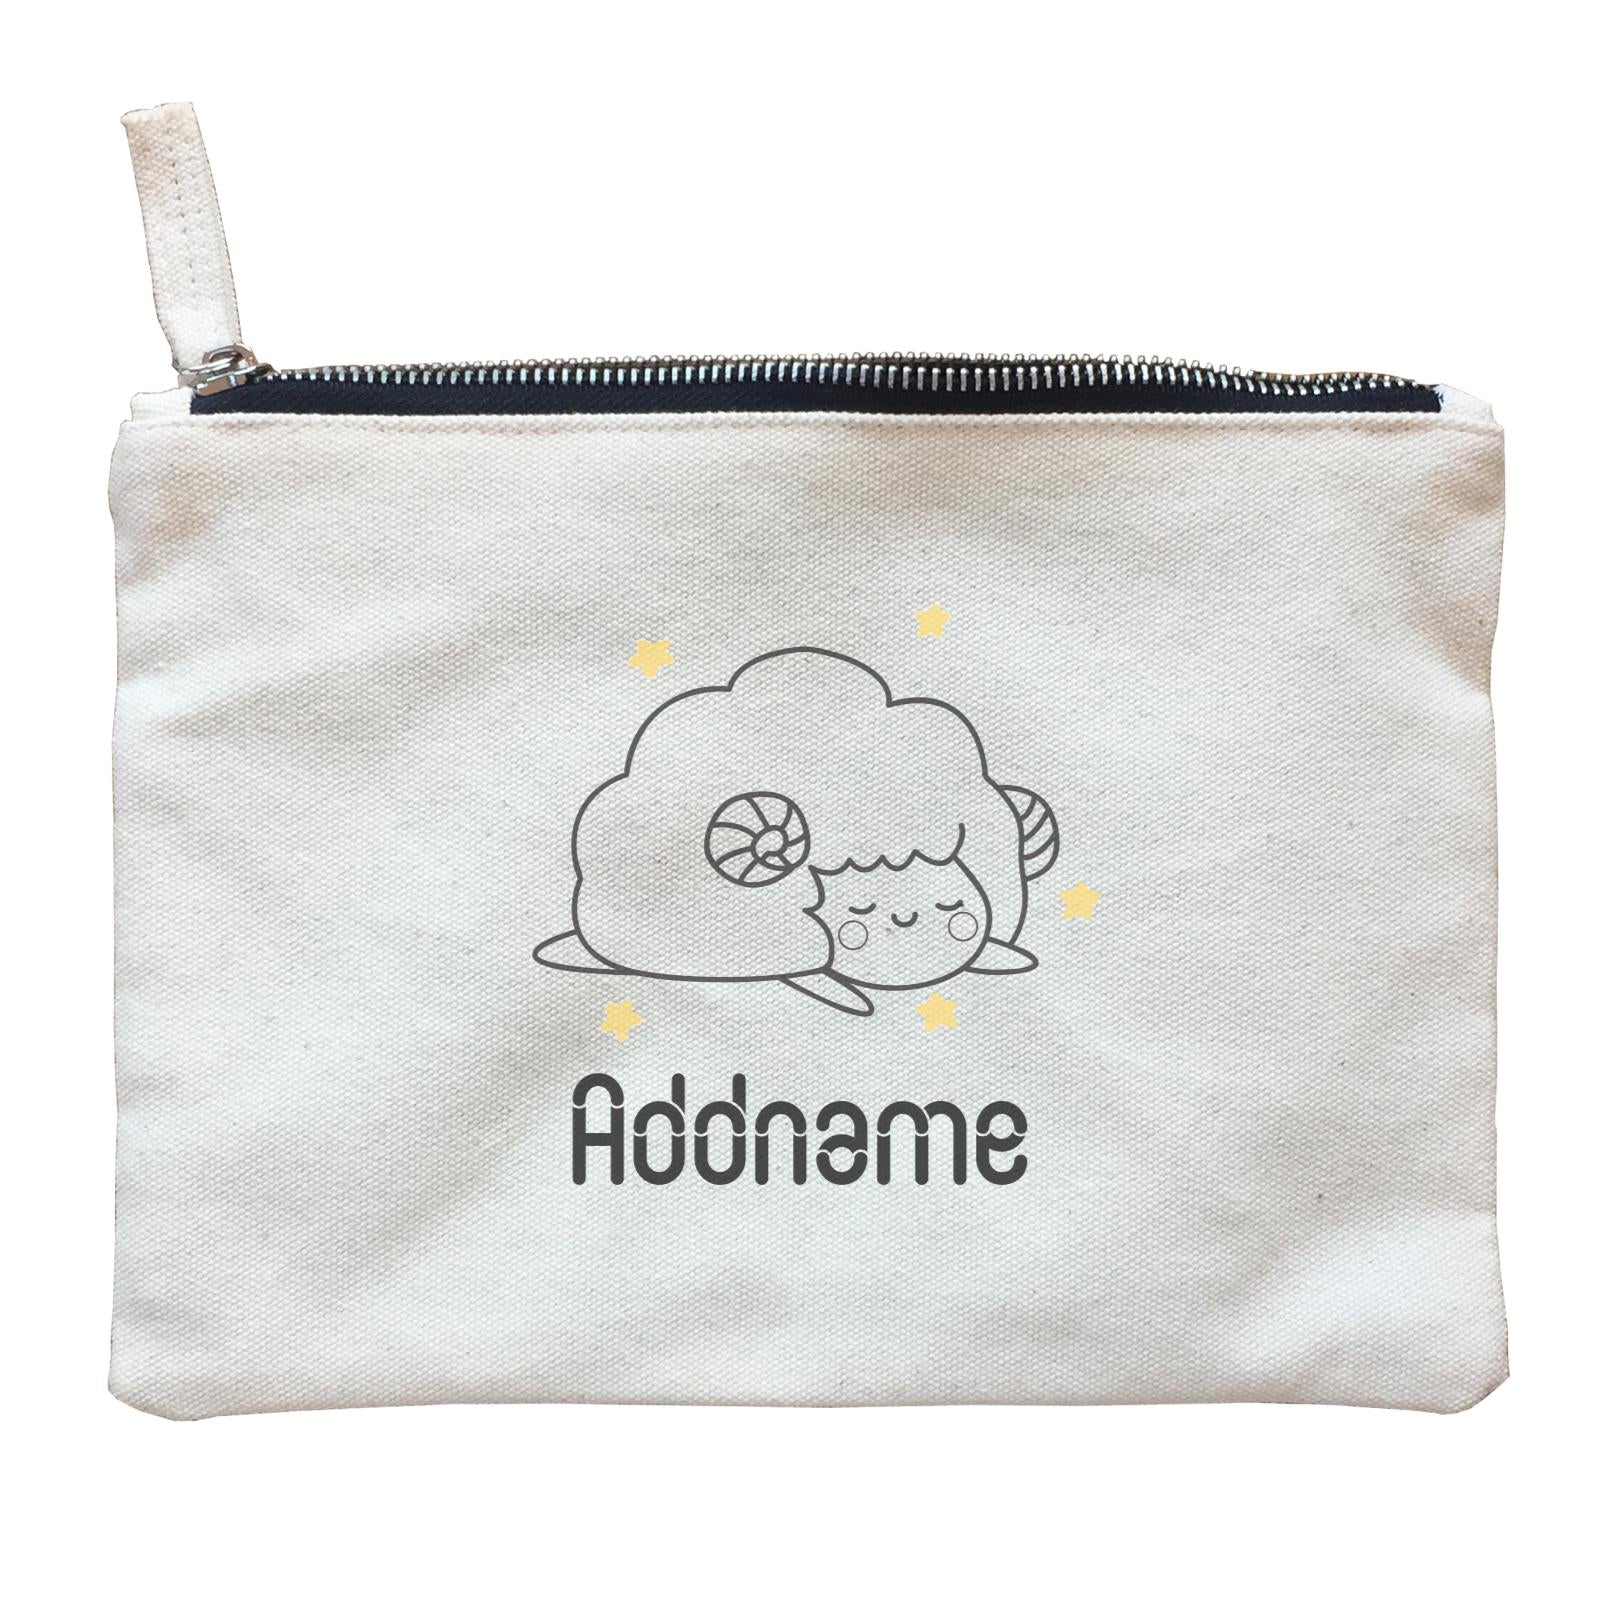 Coloring Outline Cute Hand Drawn Animals Farm Sheep Addname Zipper Pouch